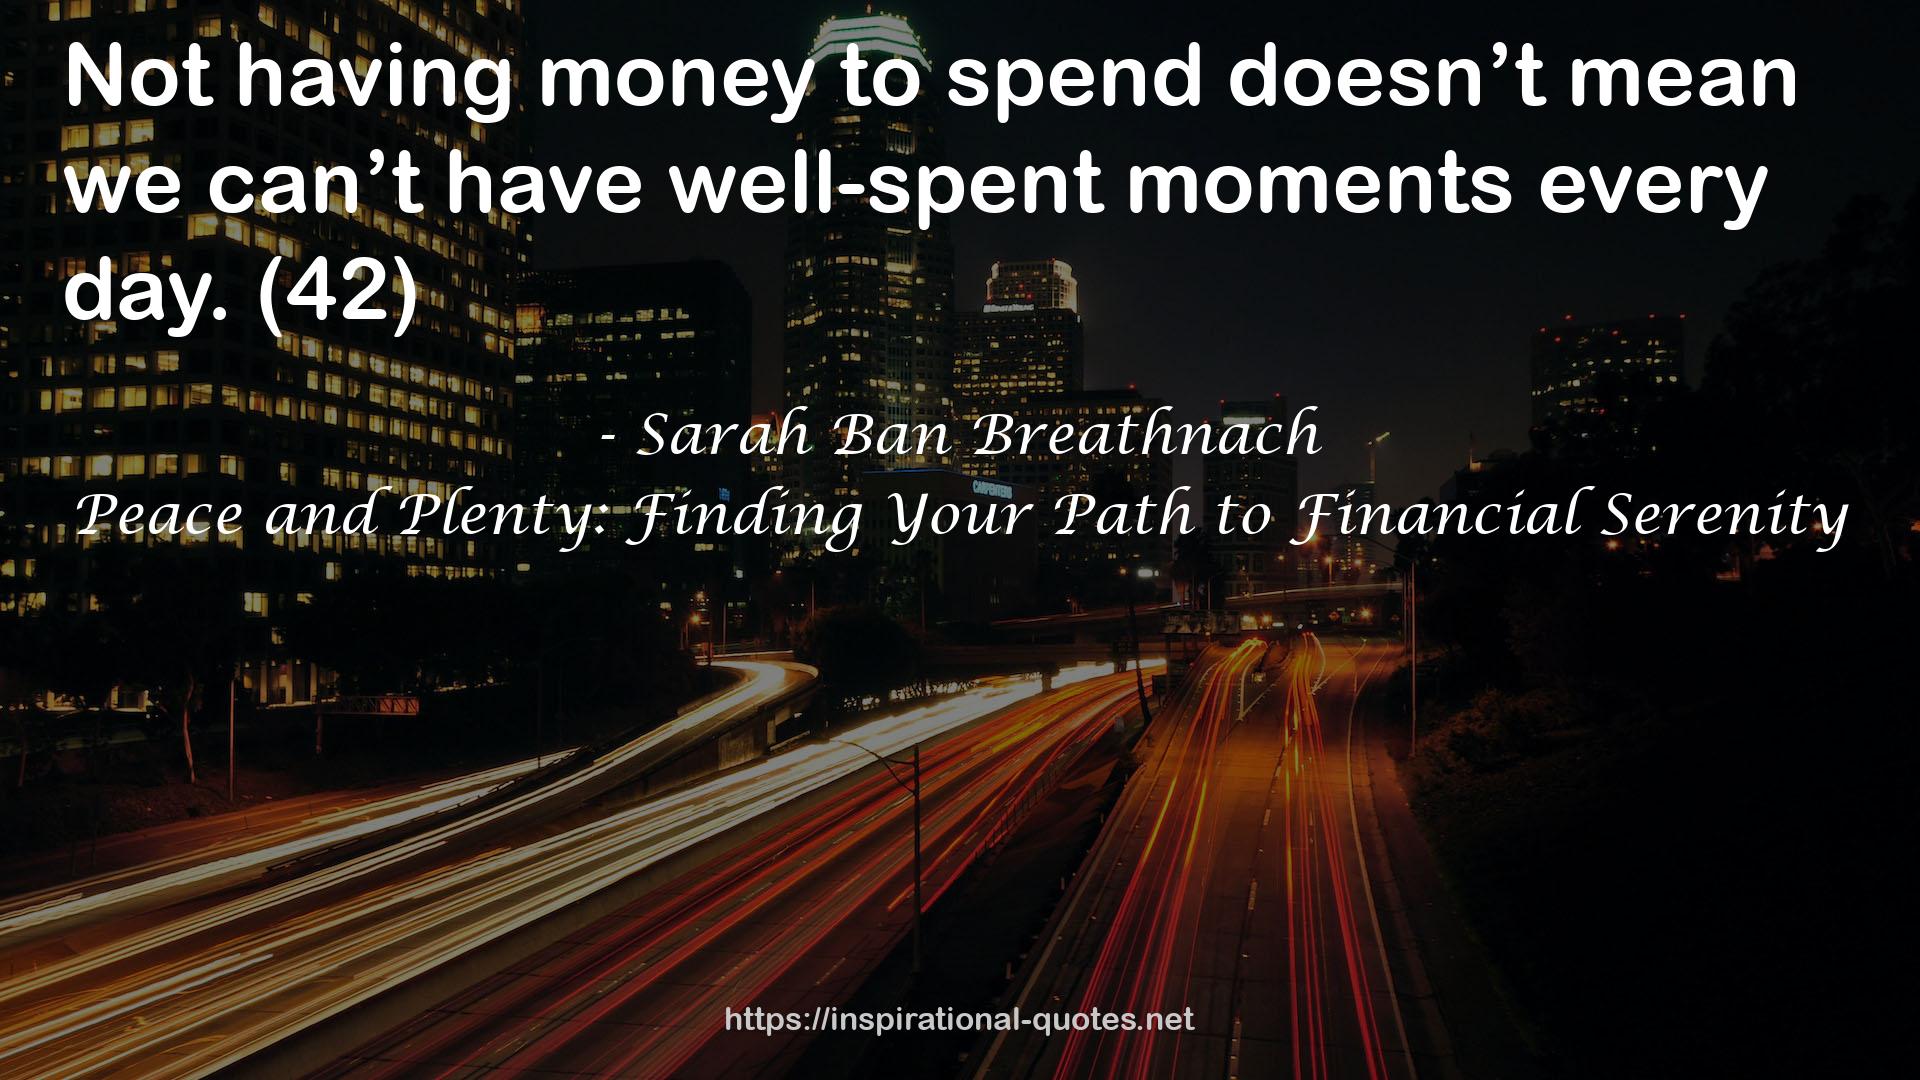 Peace and Plenty: Finding Your Path to Financial Serenity QUOTES